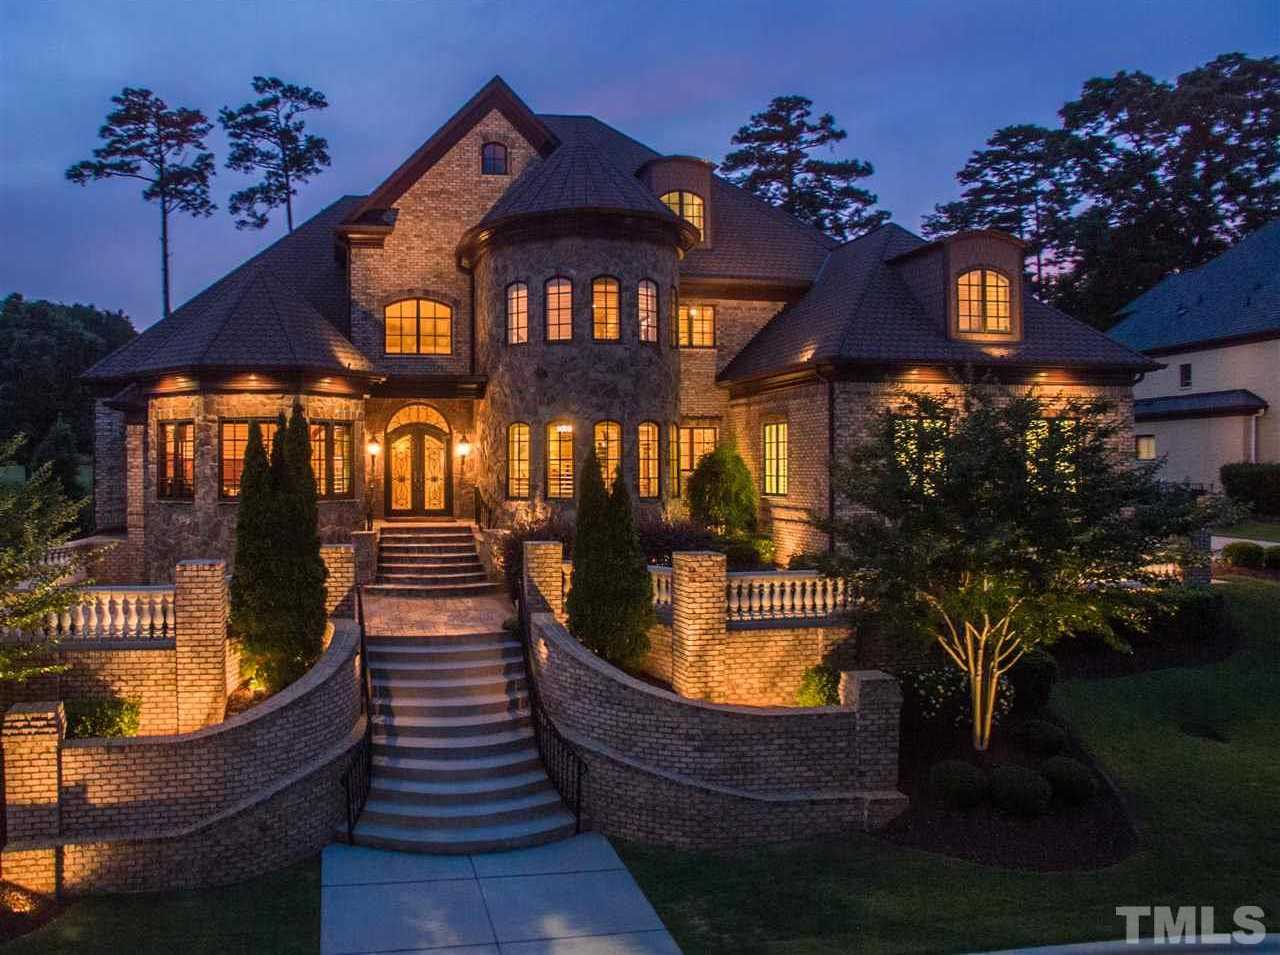 New Luxury Homes In Raleigh Nc - Homemade Ftempo